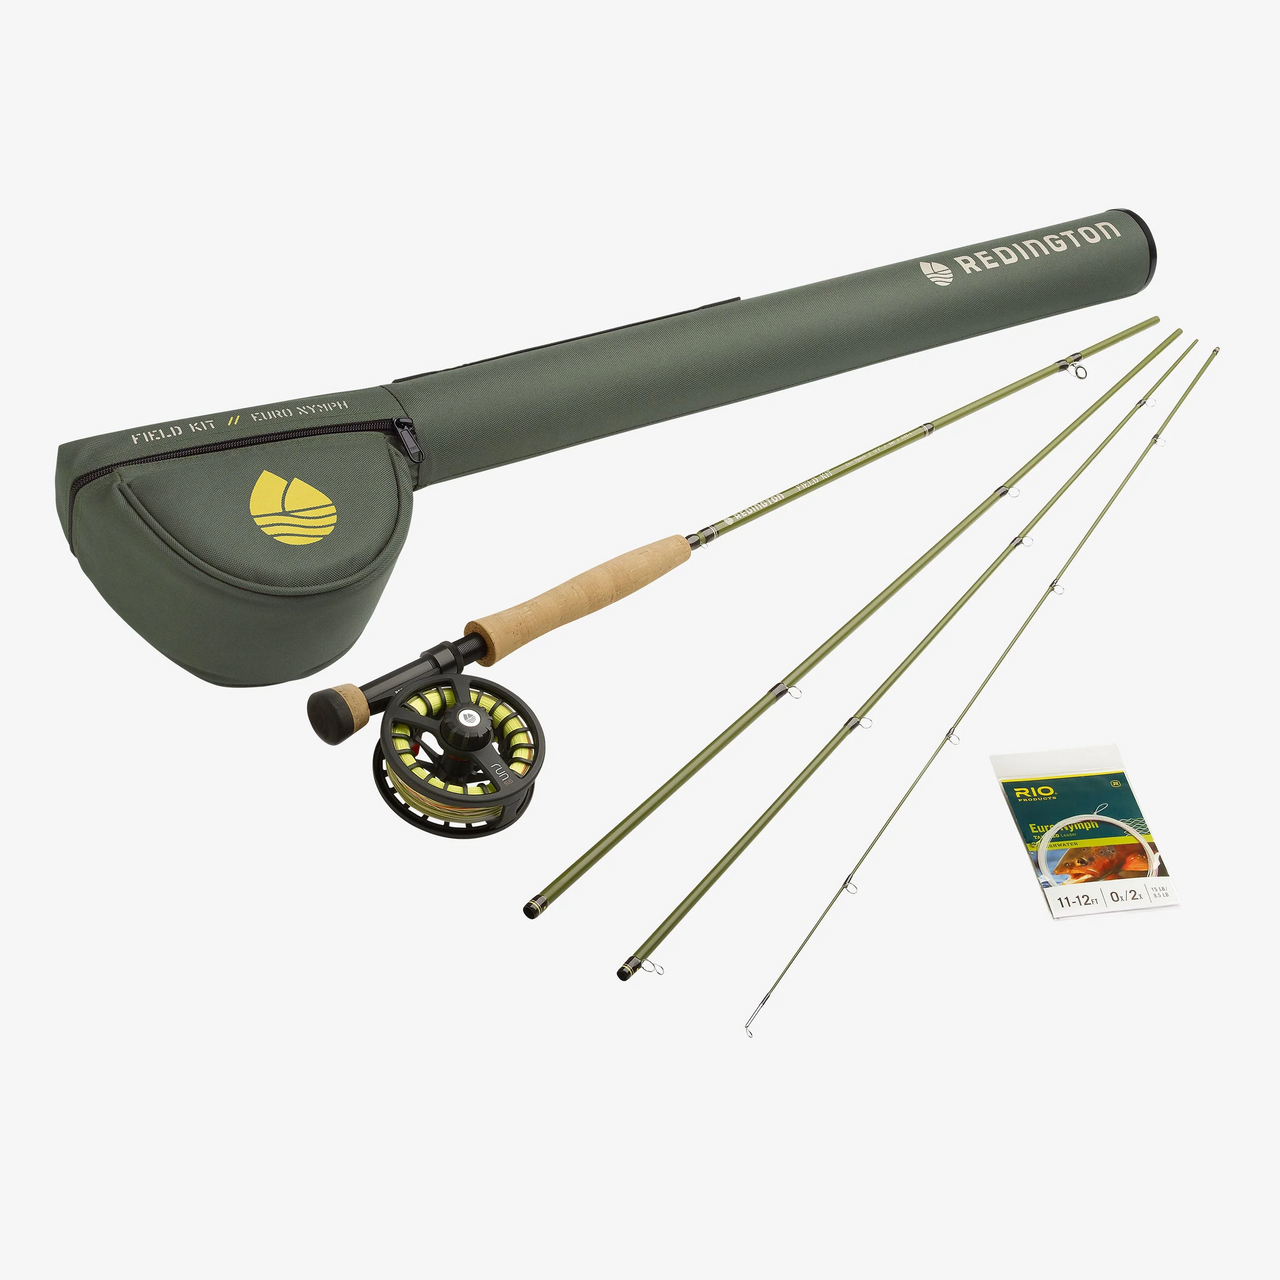 Euro Nymphing Setup Field Kit - 3100-4 - N/A - Ramsey Outdoor